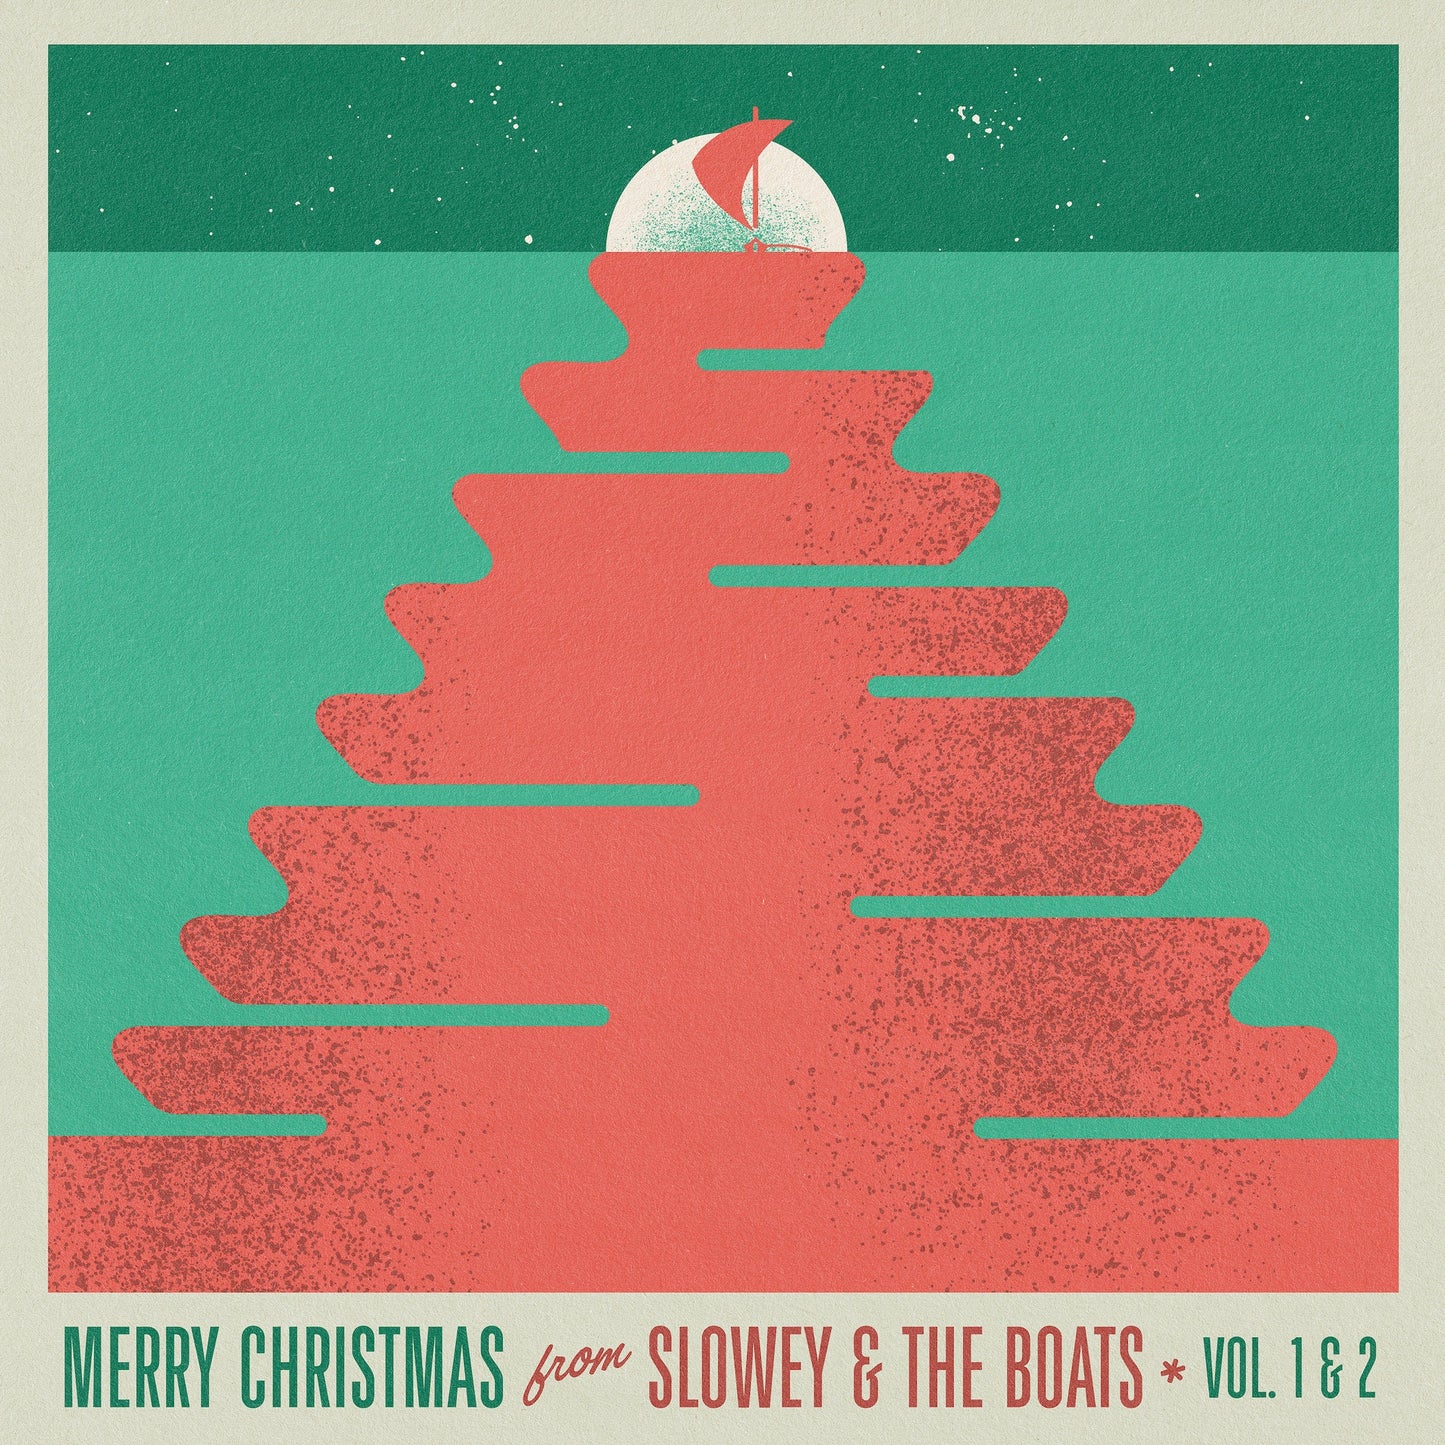 Slowey and The Boats “Merry Christmas From Slowey and The Boats" LP